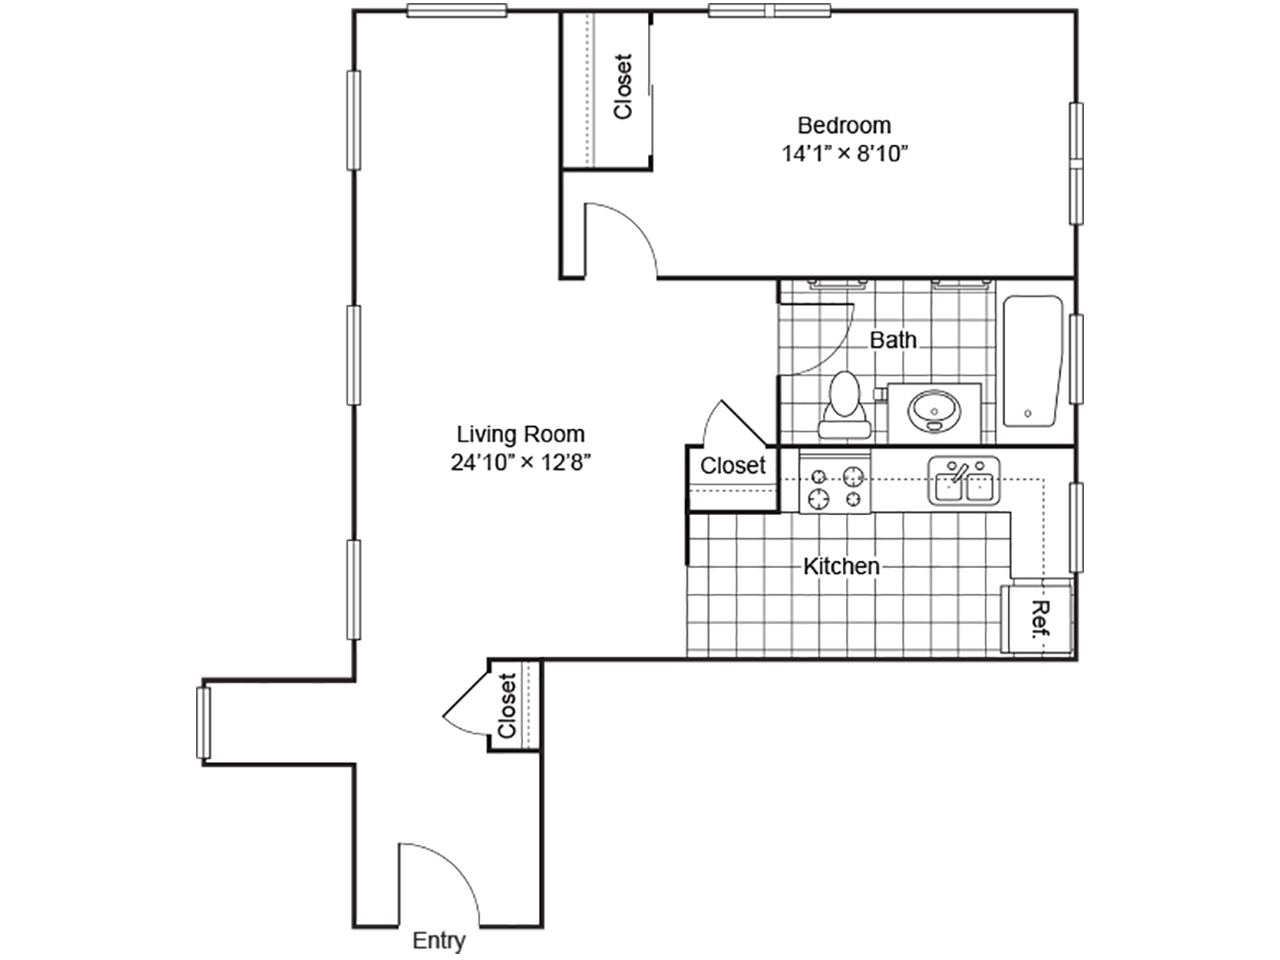 One Bedroom apartment plan with living room, bath, and kitchen